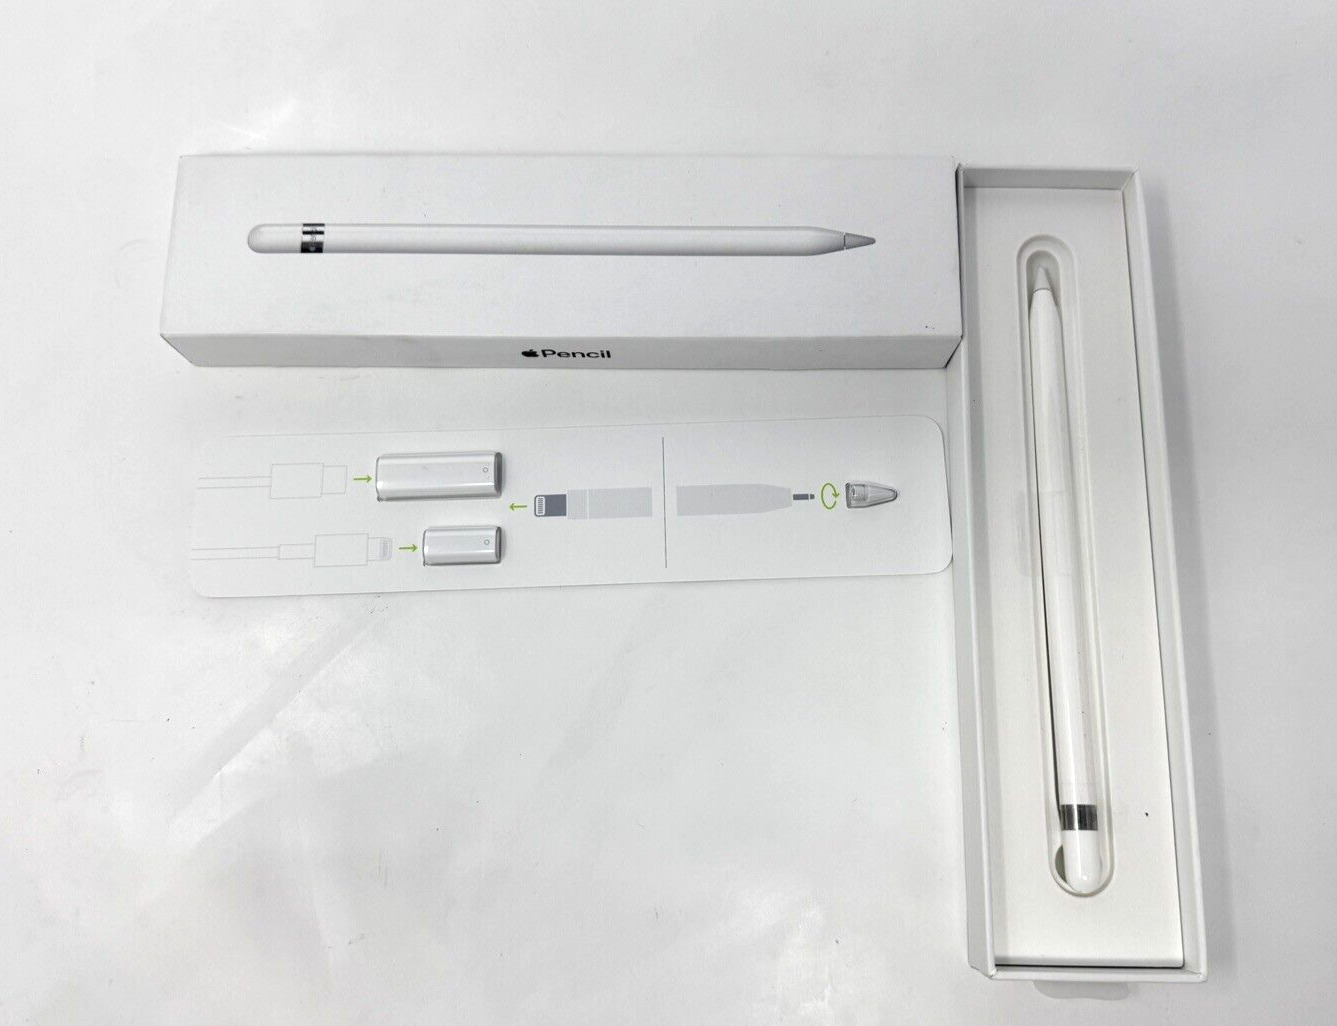 Apple Pencil (1st Generation) Stylus Pen for iPad, iPhone - White (MQLY3AM/A)